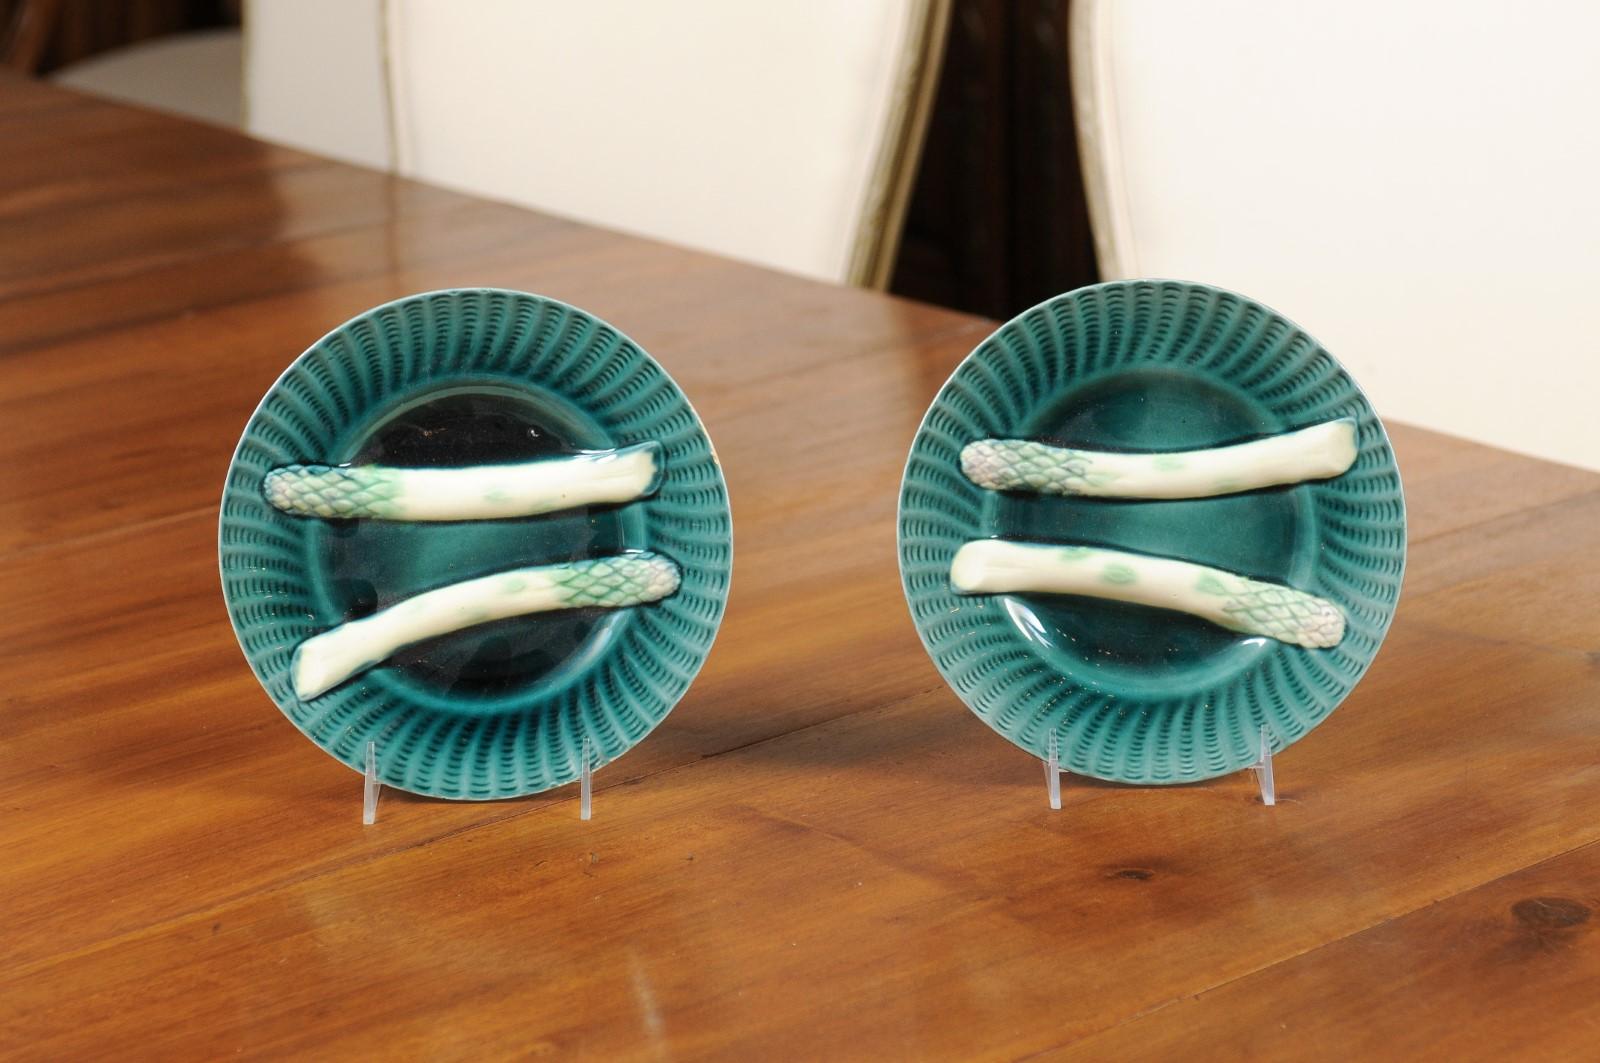 A pair of French asparagus plates from the 20th century, with aqua ground and rippled accents. Created in France during the 20th century, each of this pair of asparagus plates features an aqua ground adorned with rippled patterns on the edge,